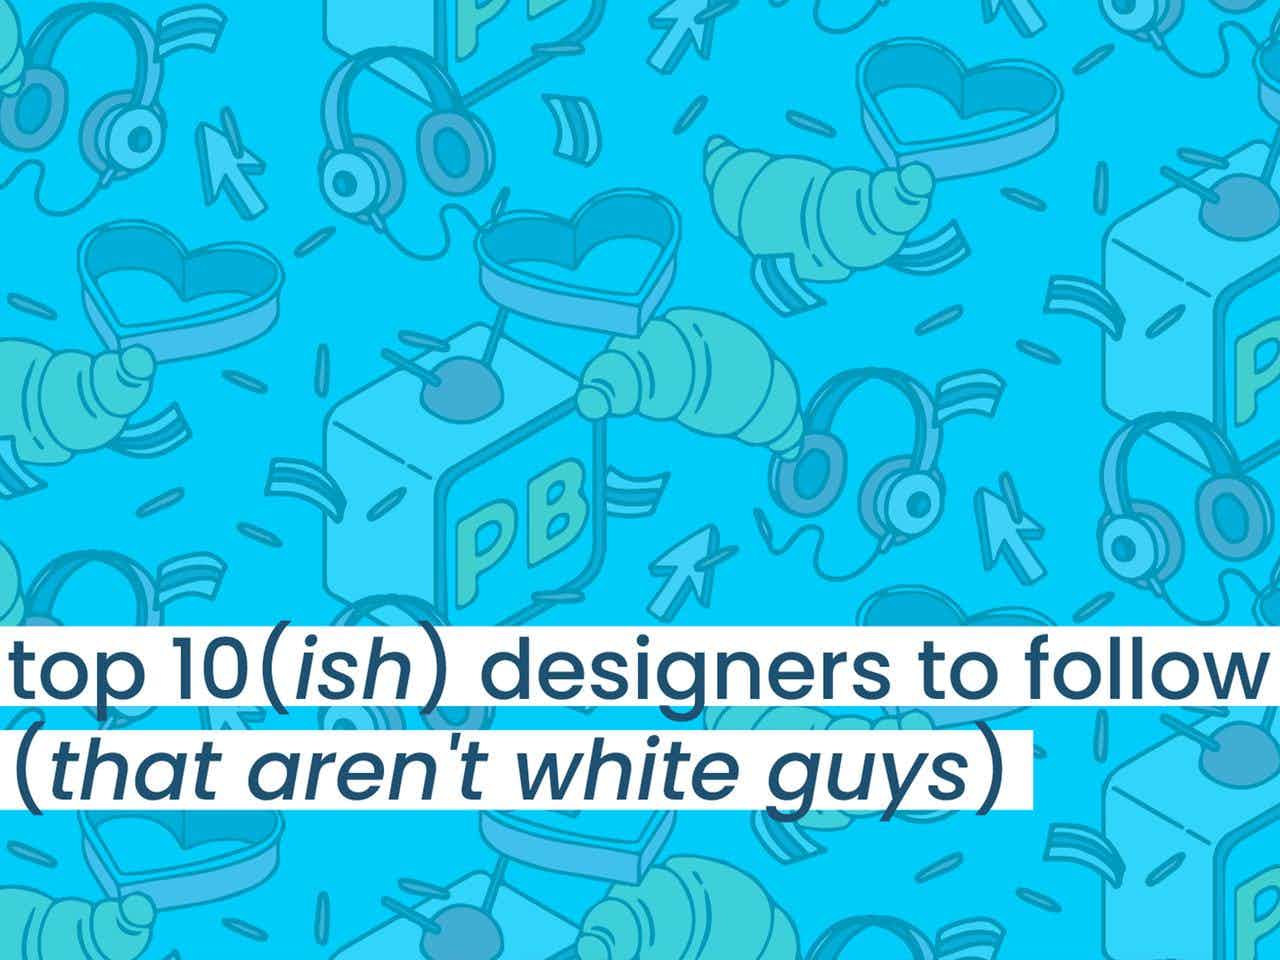 cover photo for Top 12 Graphic Designers to Follow (That Aren't White Guys), written by Lexi Kane